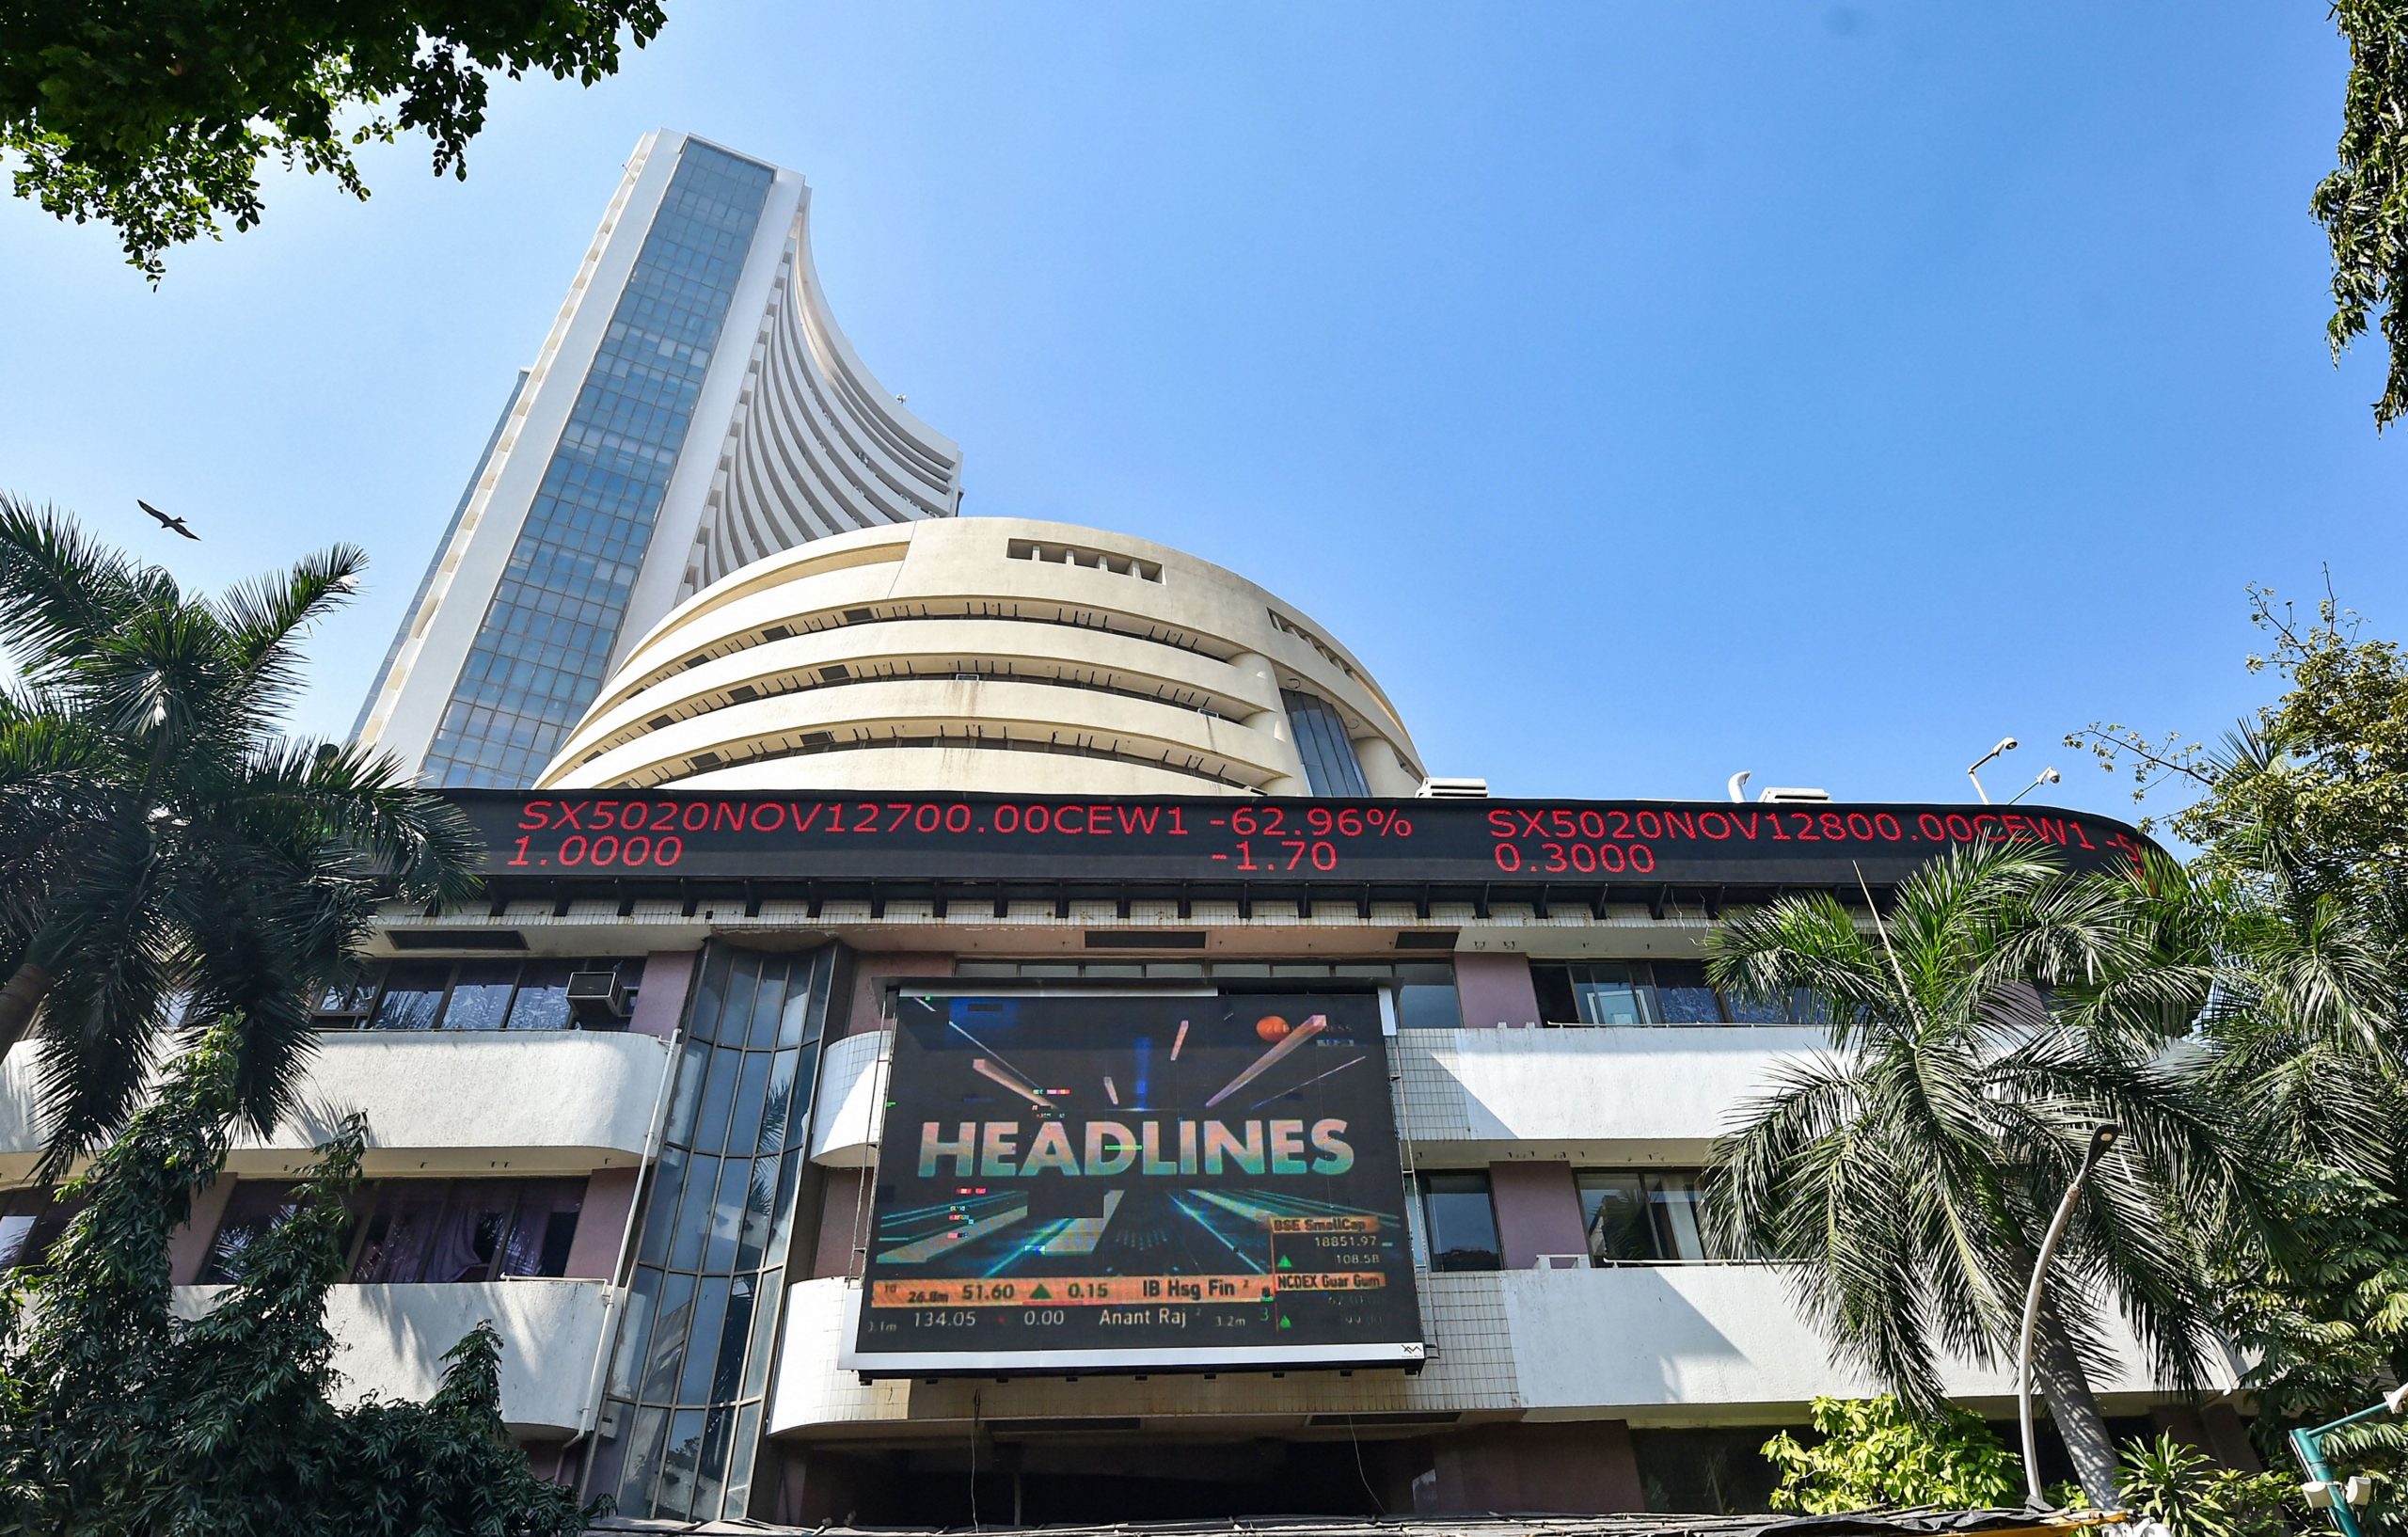 Trending Stocks: Adani Entp, Astral, Hero MotoCorp and others in news today